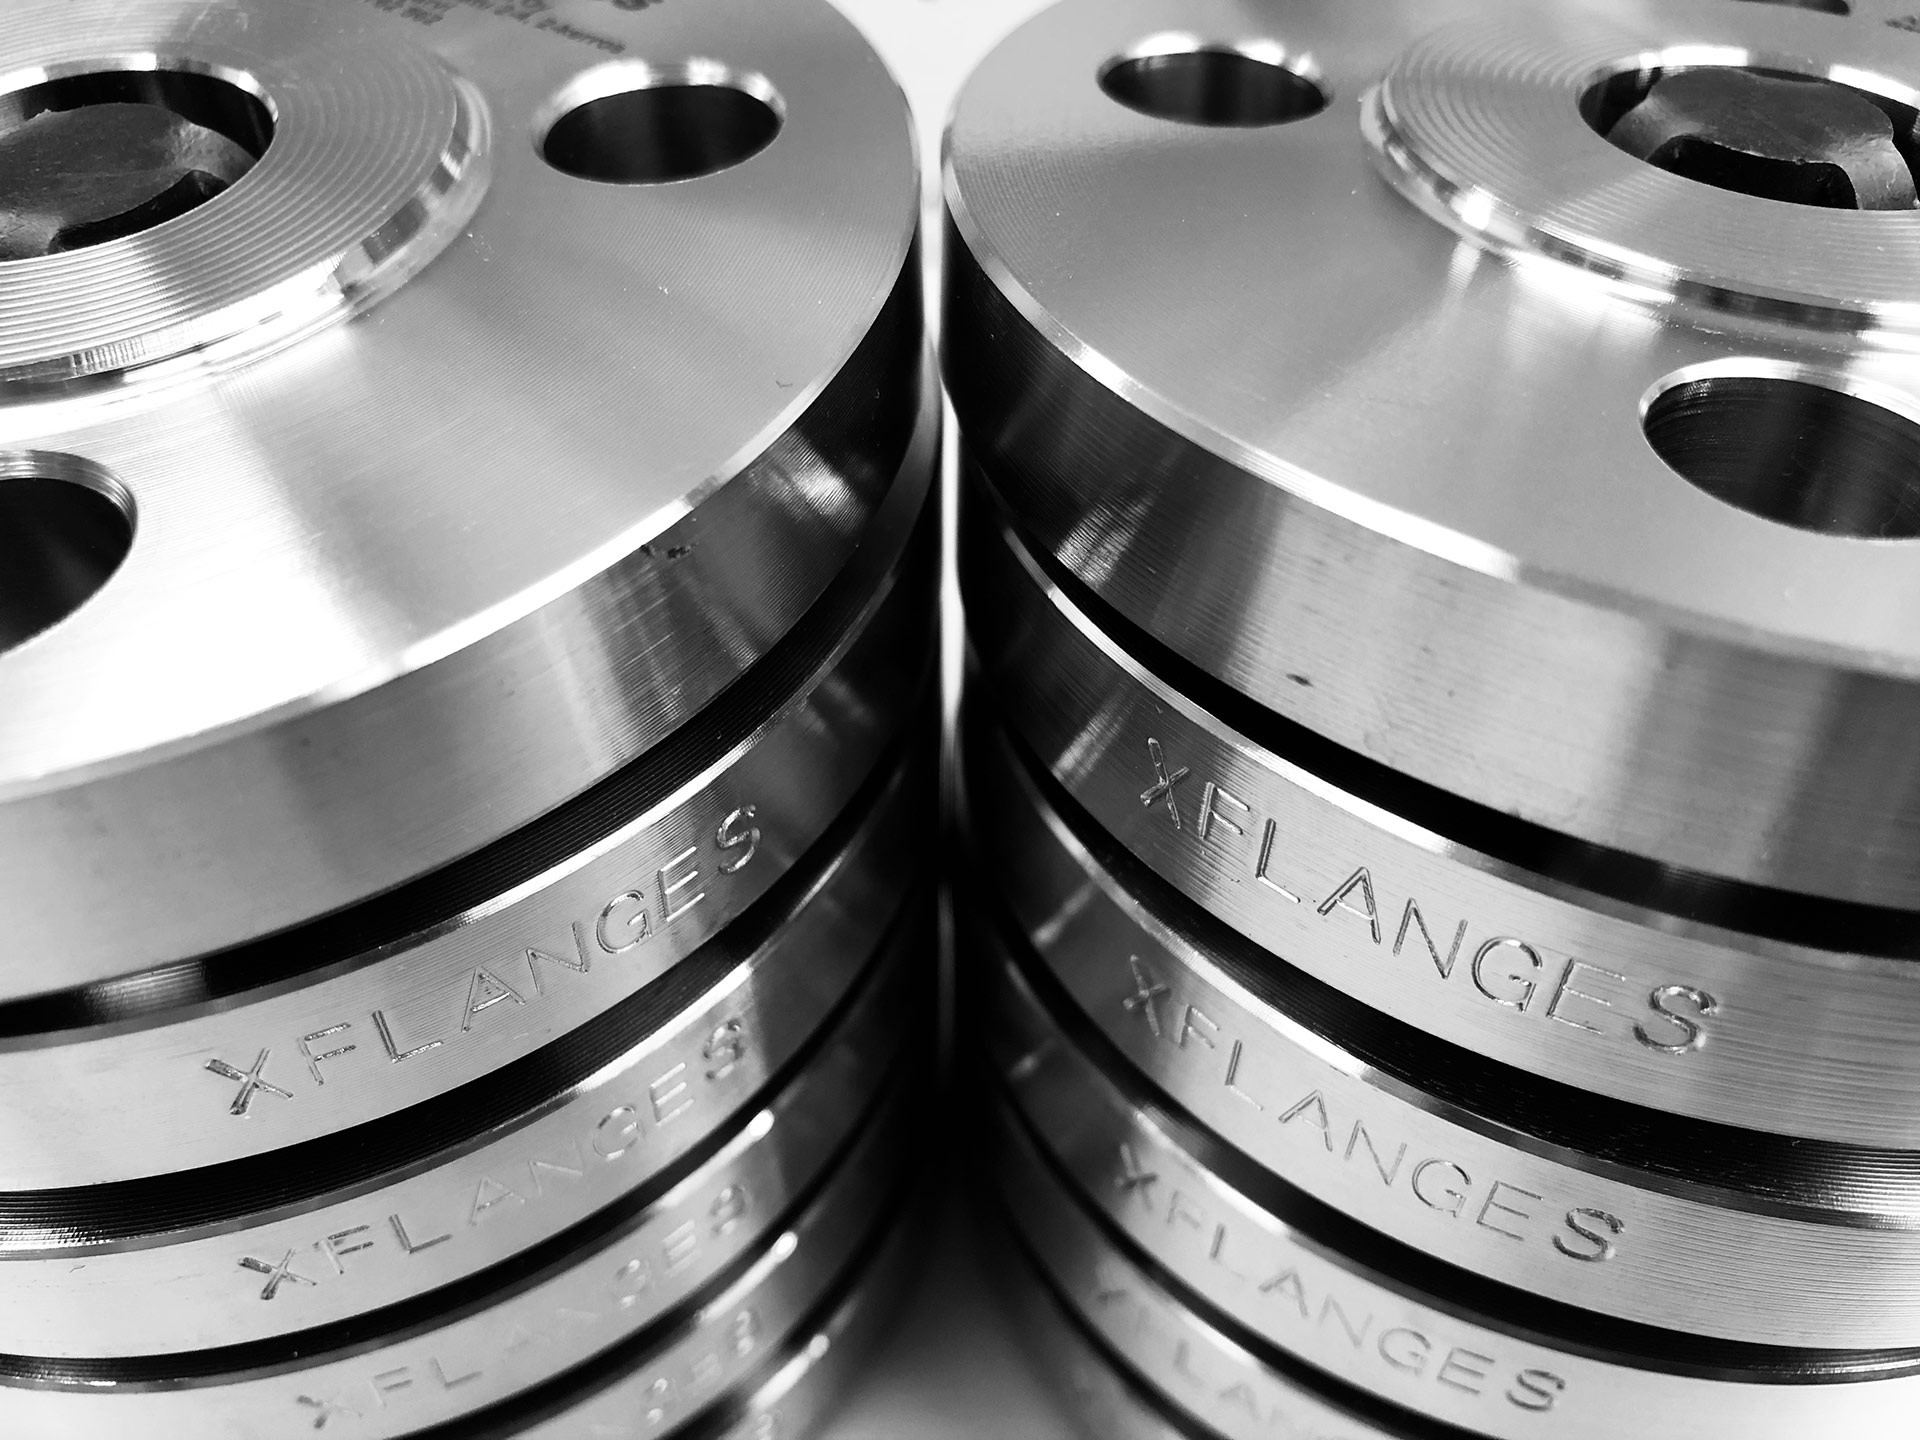 Xpoint will purchase top quality flanges directly from our suppliers.